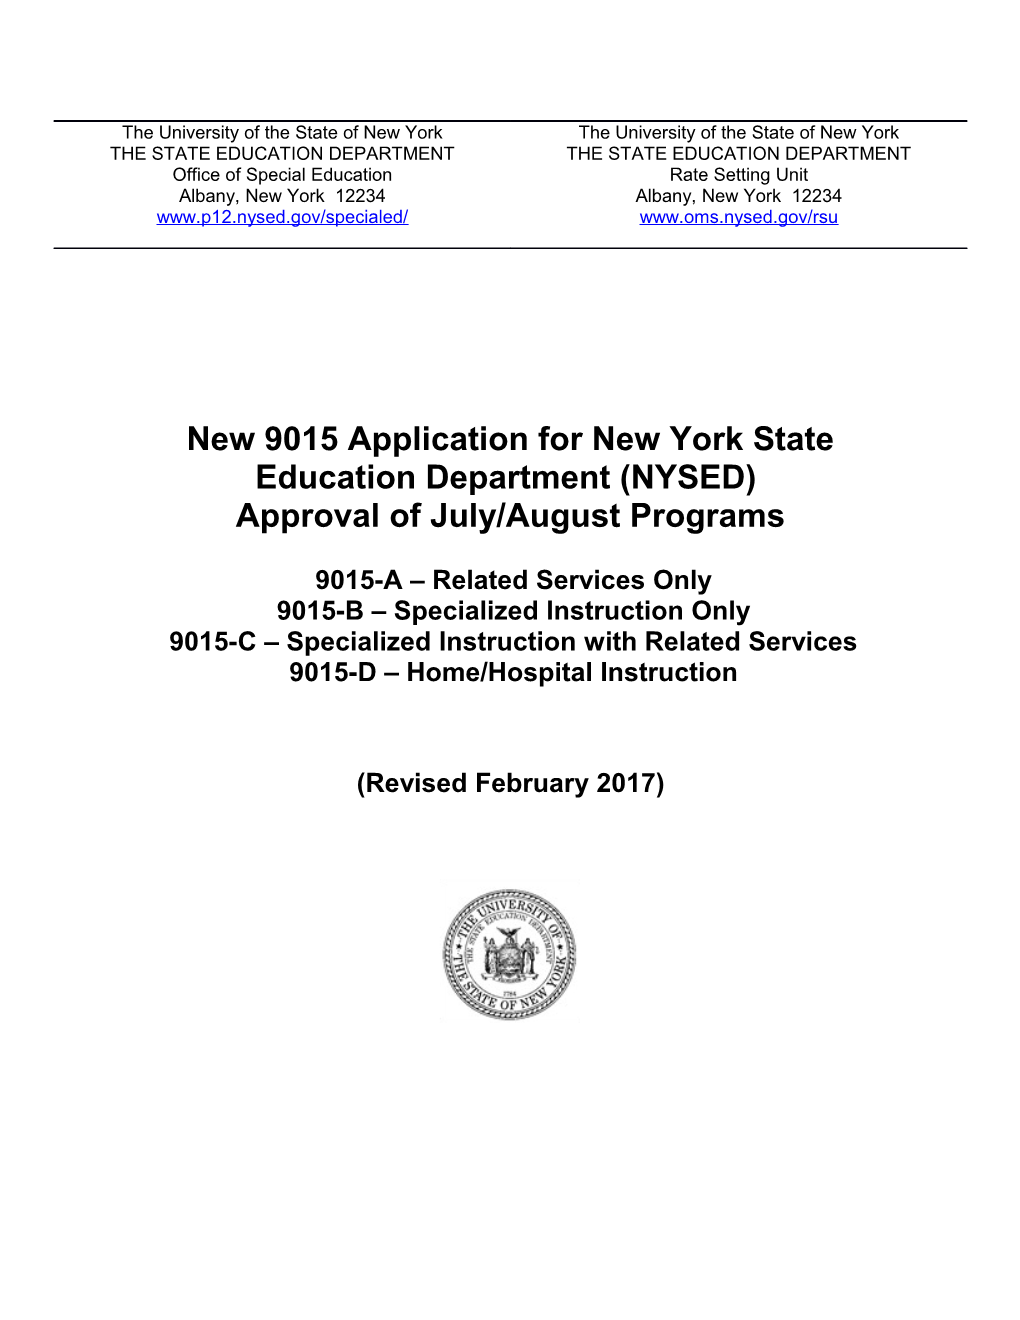 New 9015 Application for New York State Education Department (NYSED)